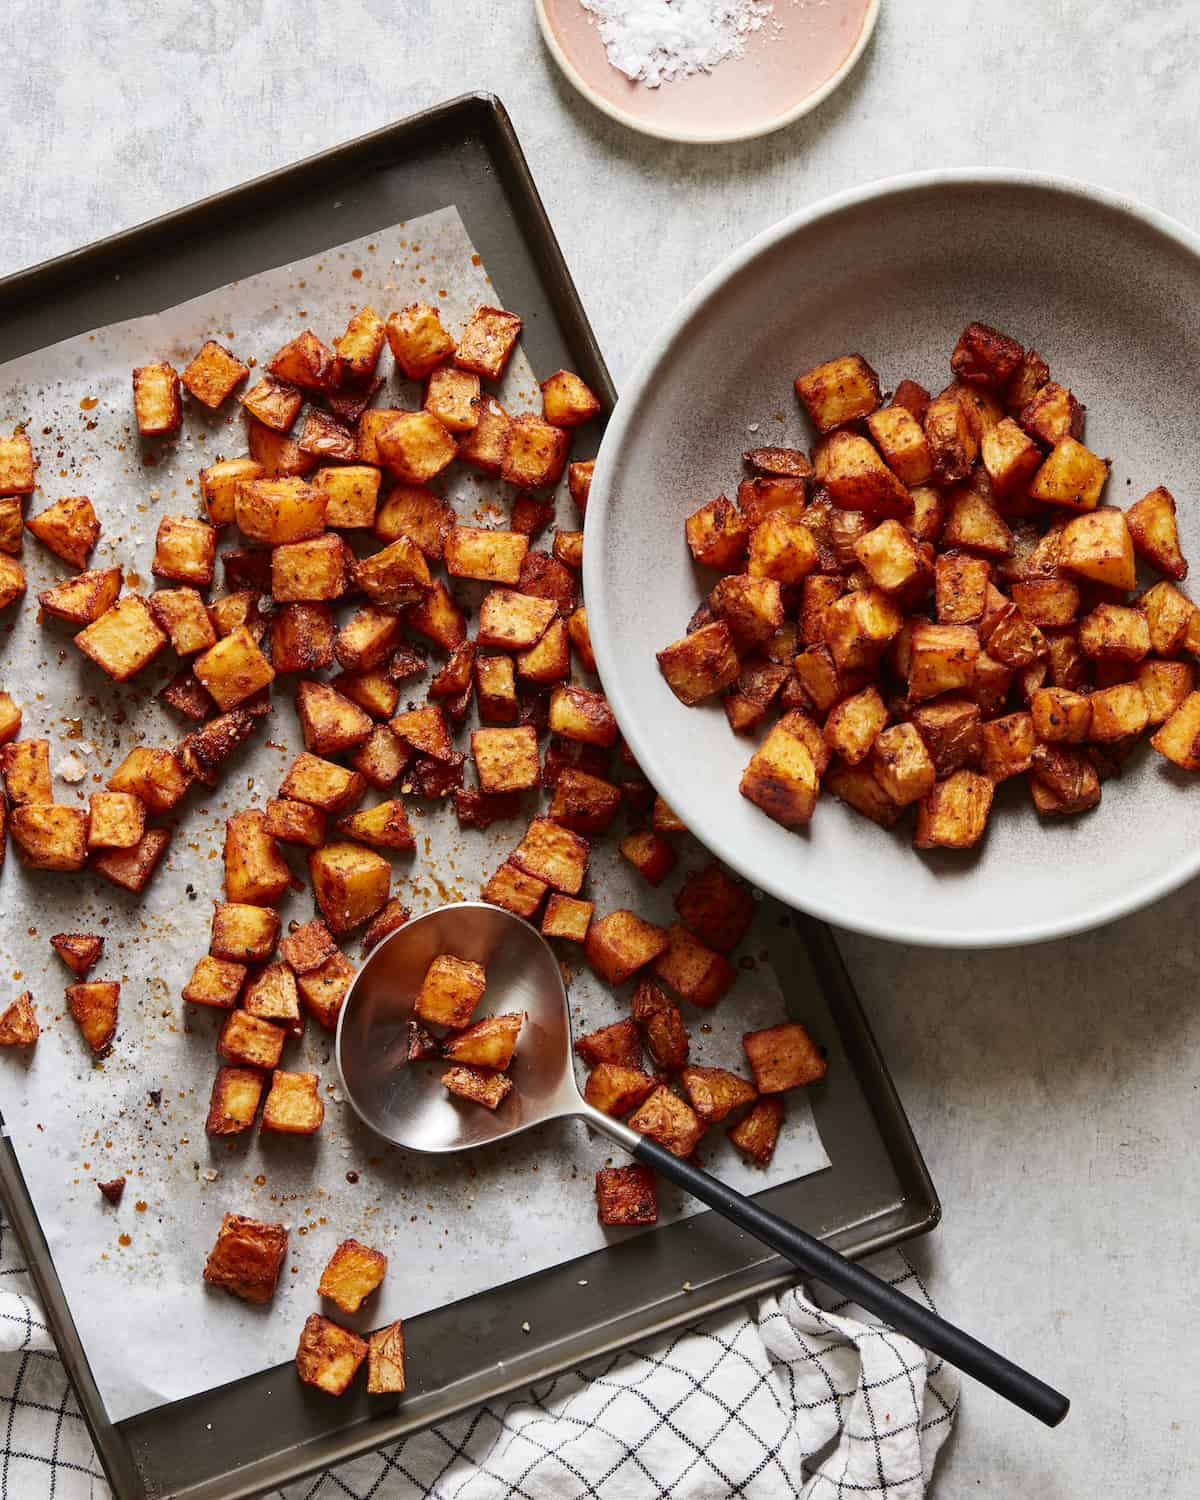 A parchment paper-lined baking sheet with cubed roasted potatoes and a serving spoon, and a grey bowl on the side with more potatoes in it.